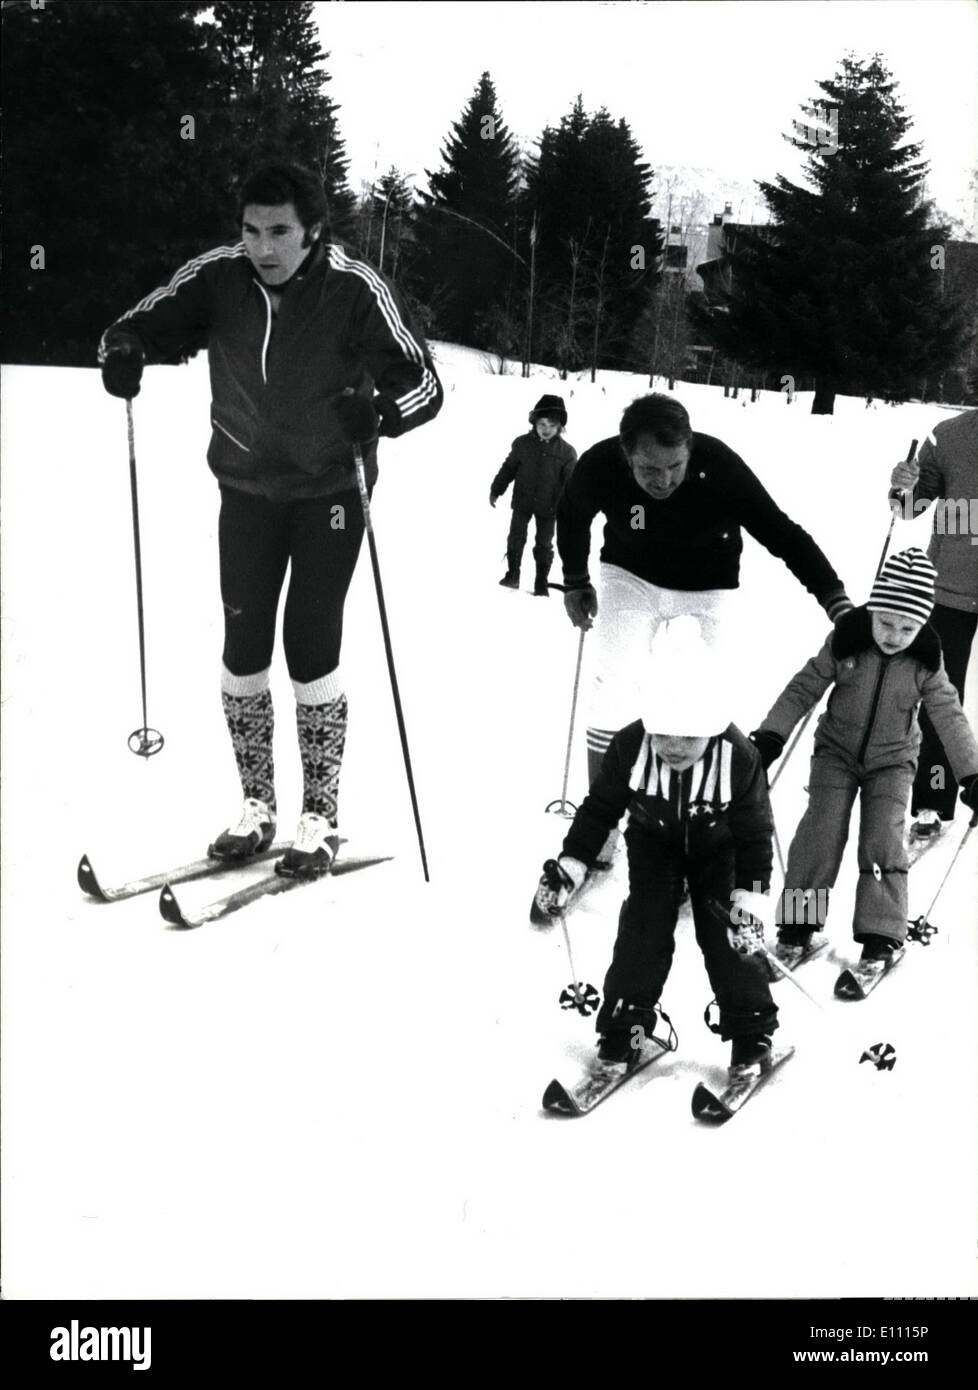 Dec. 12, 1974 - Eddy Merckx Skiing in Switzerland: Worldchampion Eddy Merckx actually spends his winter vacations in Crans sir Sierre in Switzerland where he goes out for skiing nearly every day, accompanied by his little daughter Sabrina (foreground right) and ski-coach Bobby Rombaldi. Stock Photo